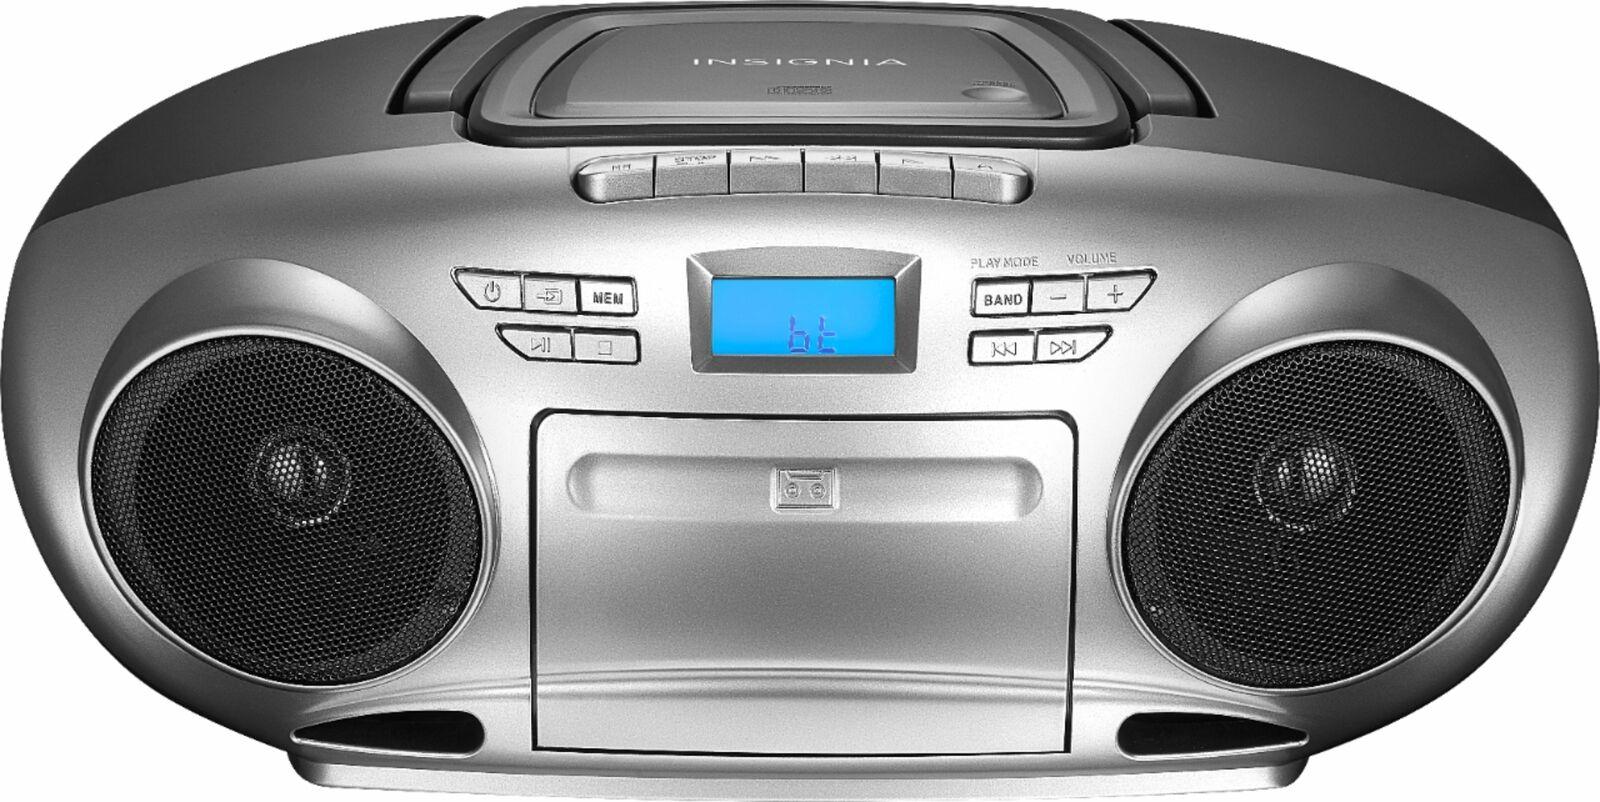 Insignia AM/FM Radio Portable CD Bluetooth Boombox for $39.99 Shipped